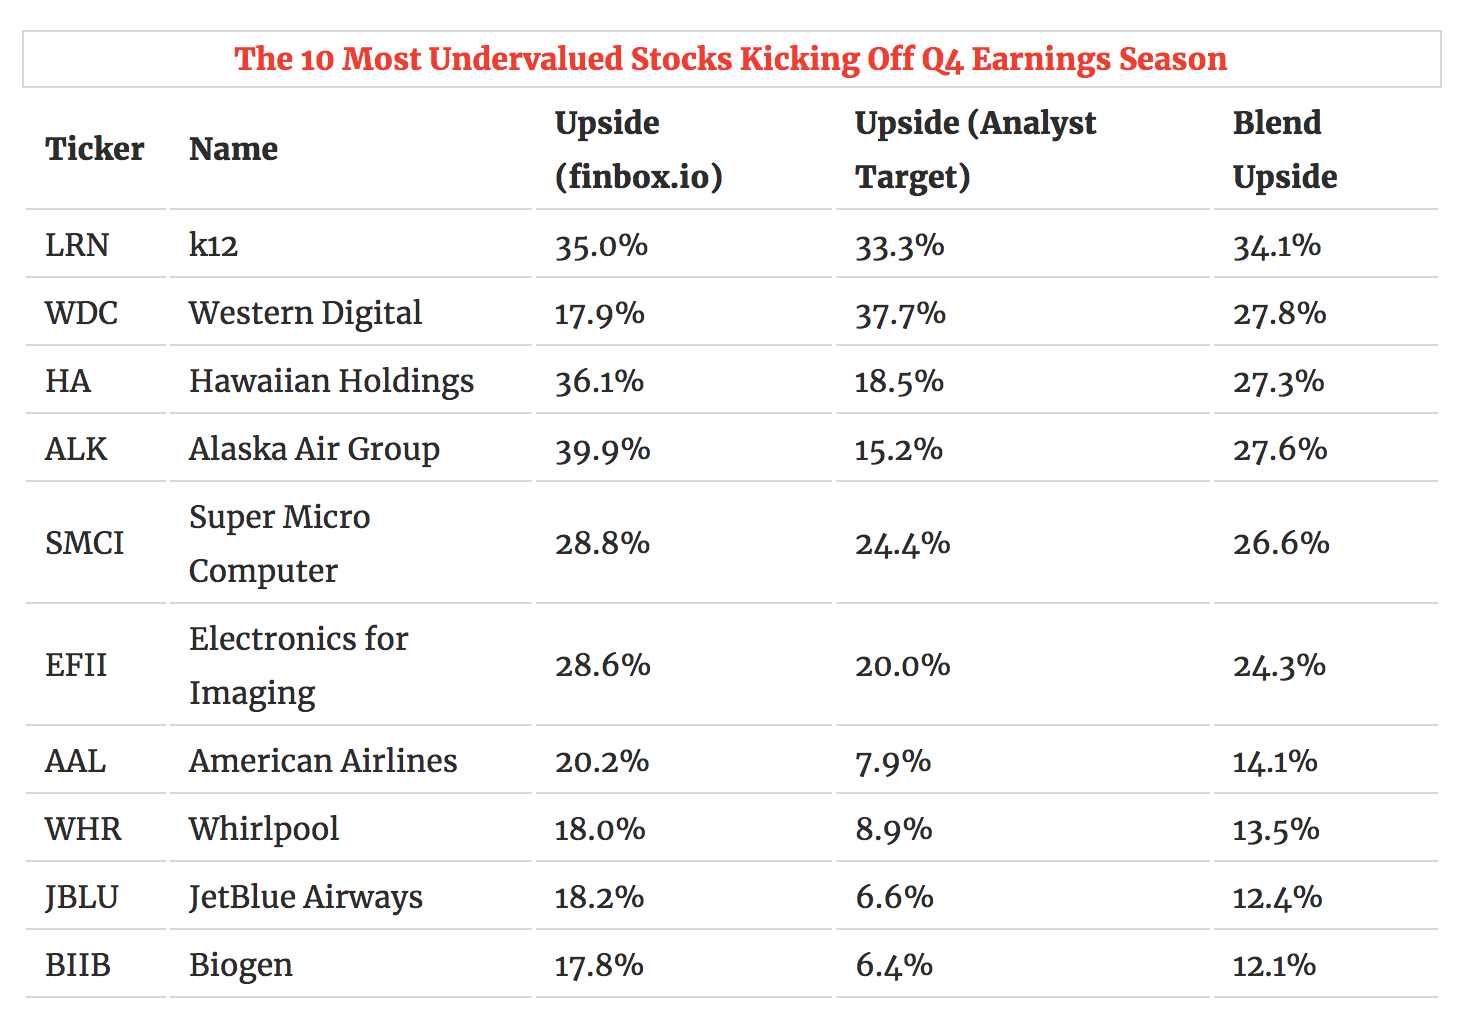 The 10 Most Undervalued Stocks Kicking Off Earnings Season